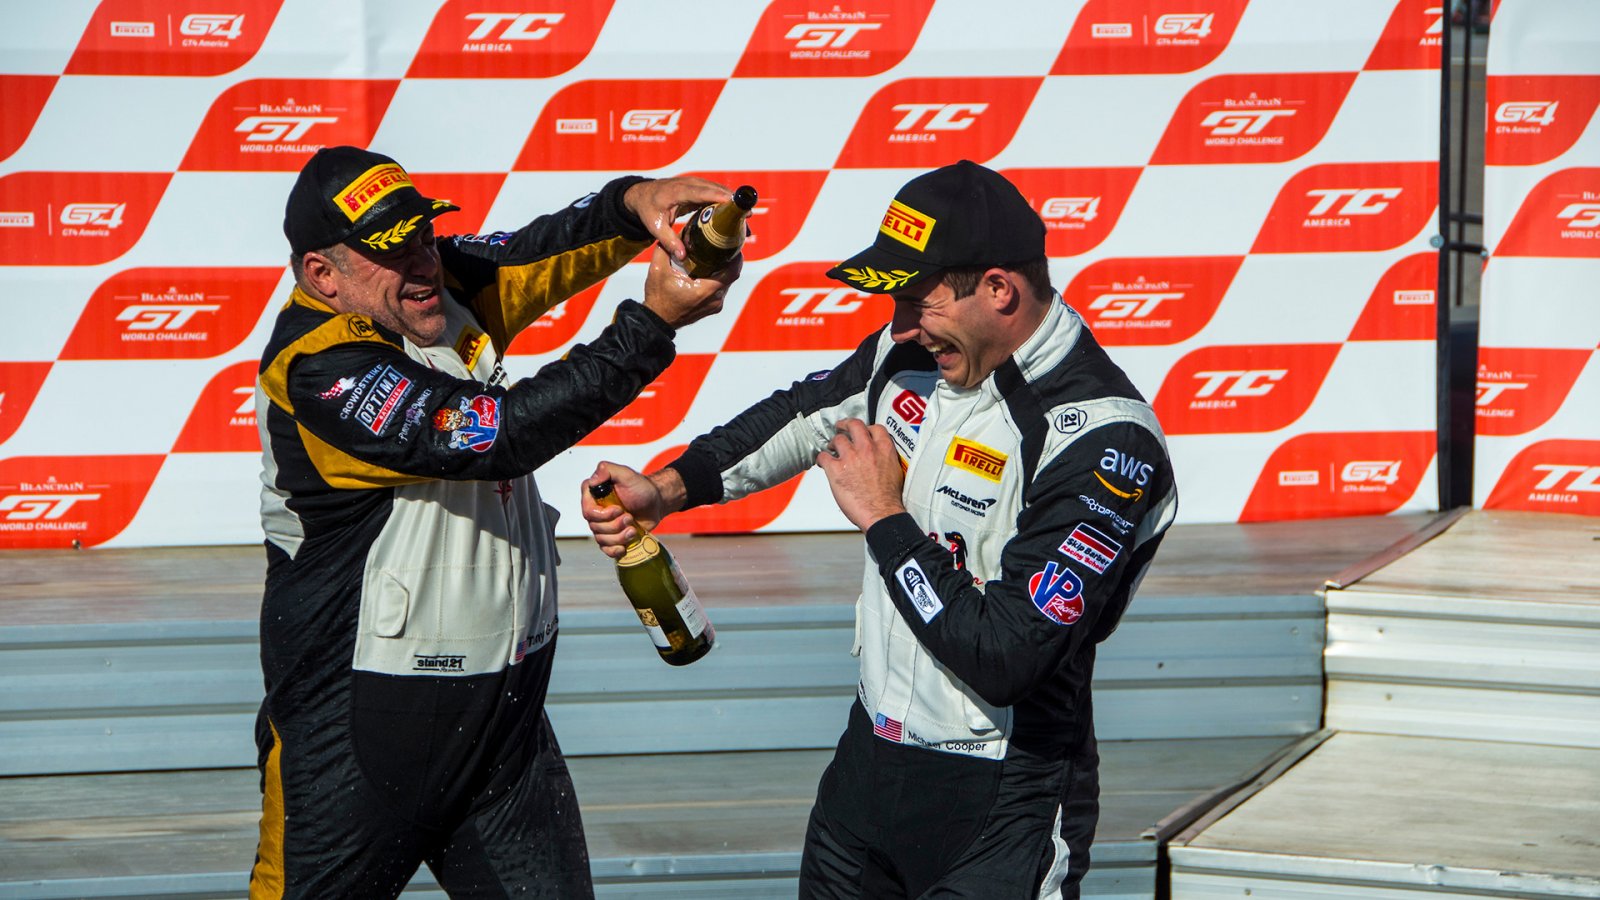 Race Victory for Cooper, Podium Finish for Gaples in GT4 Finale